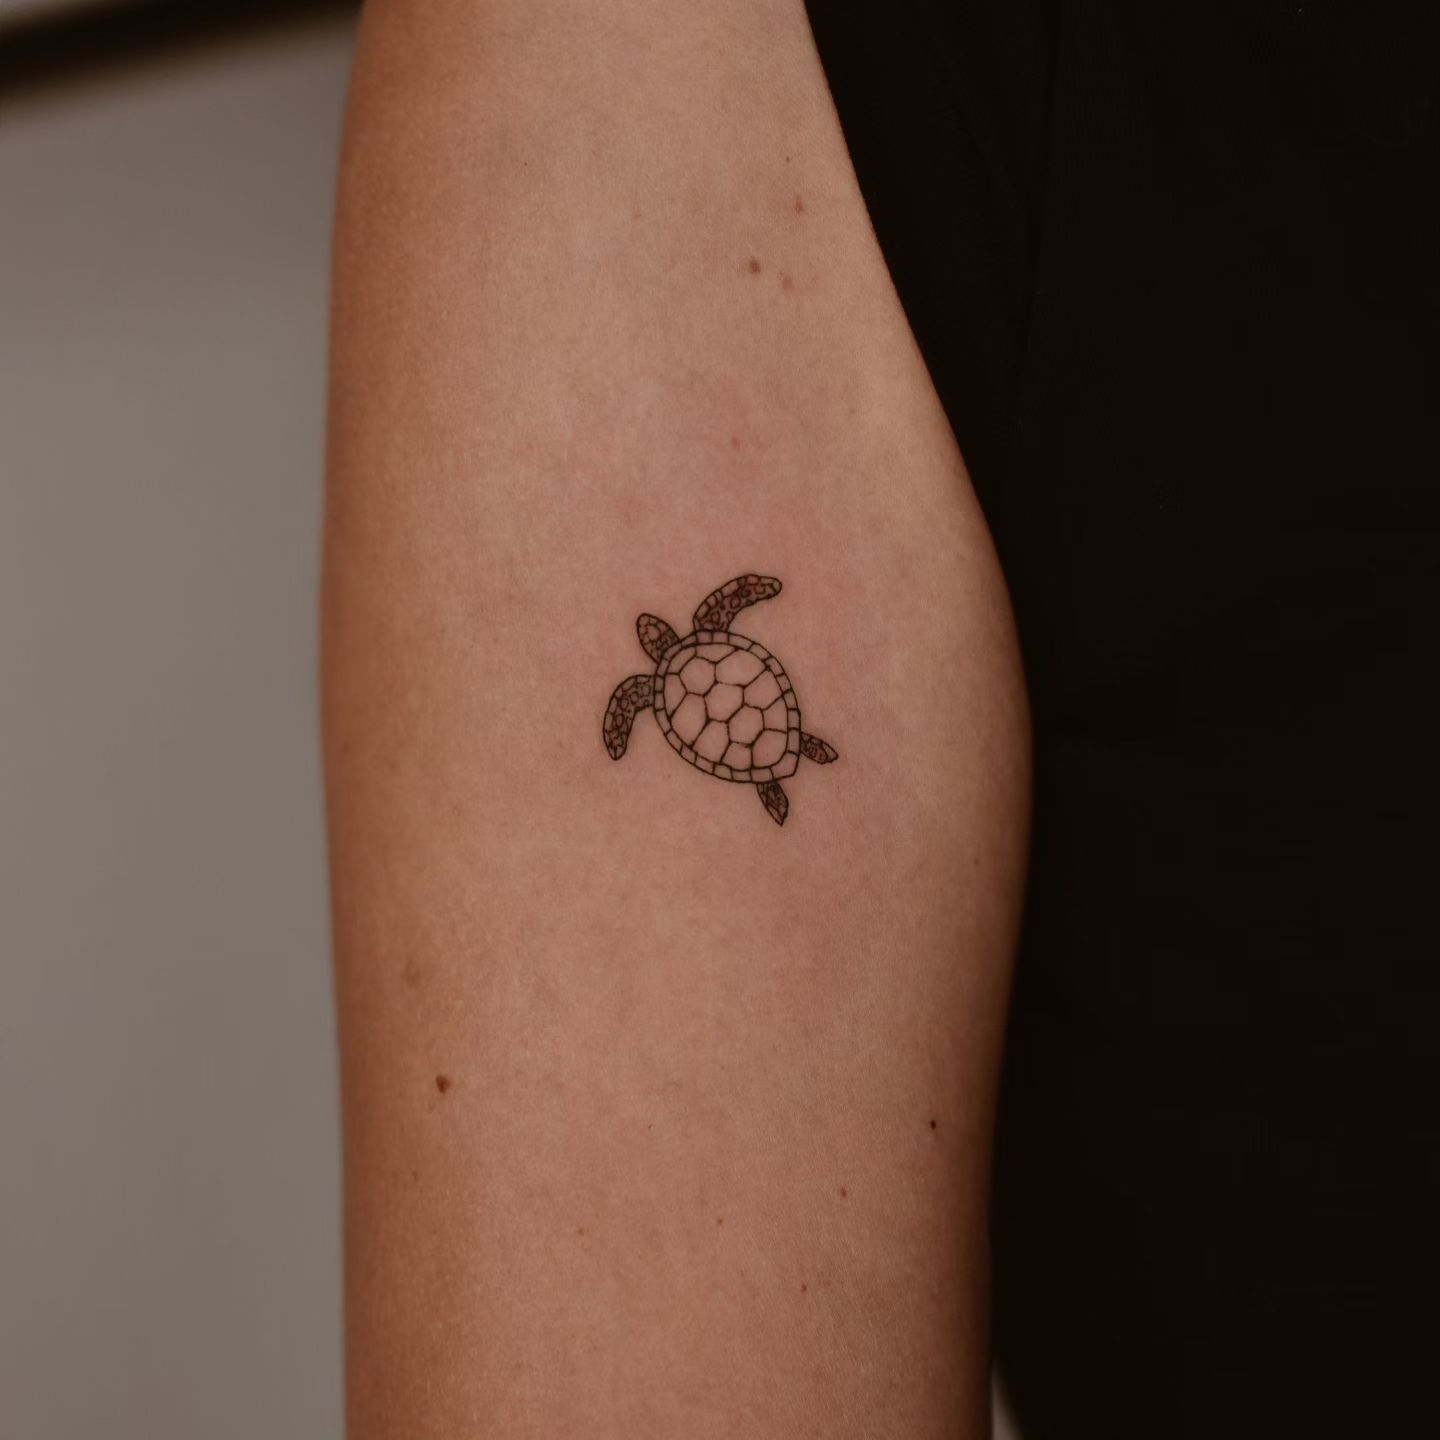 Fine line style small sea turtle tattoo on the upper arm